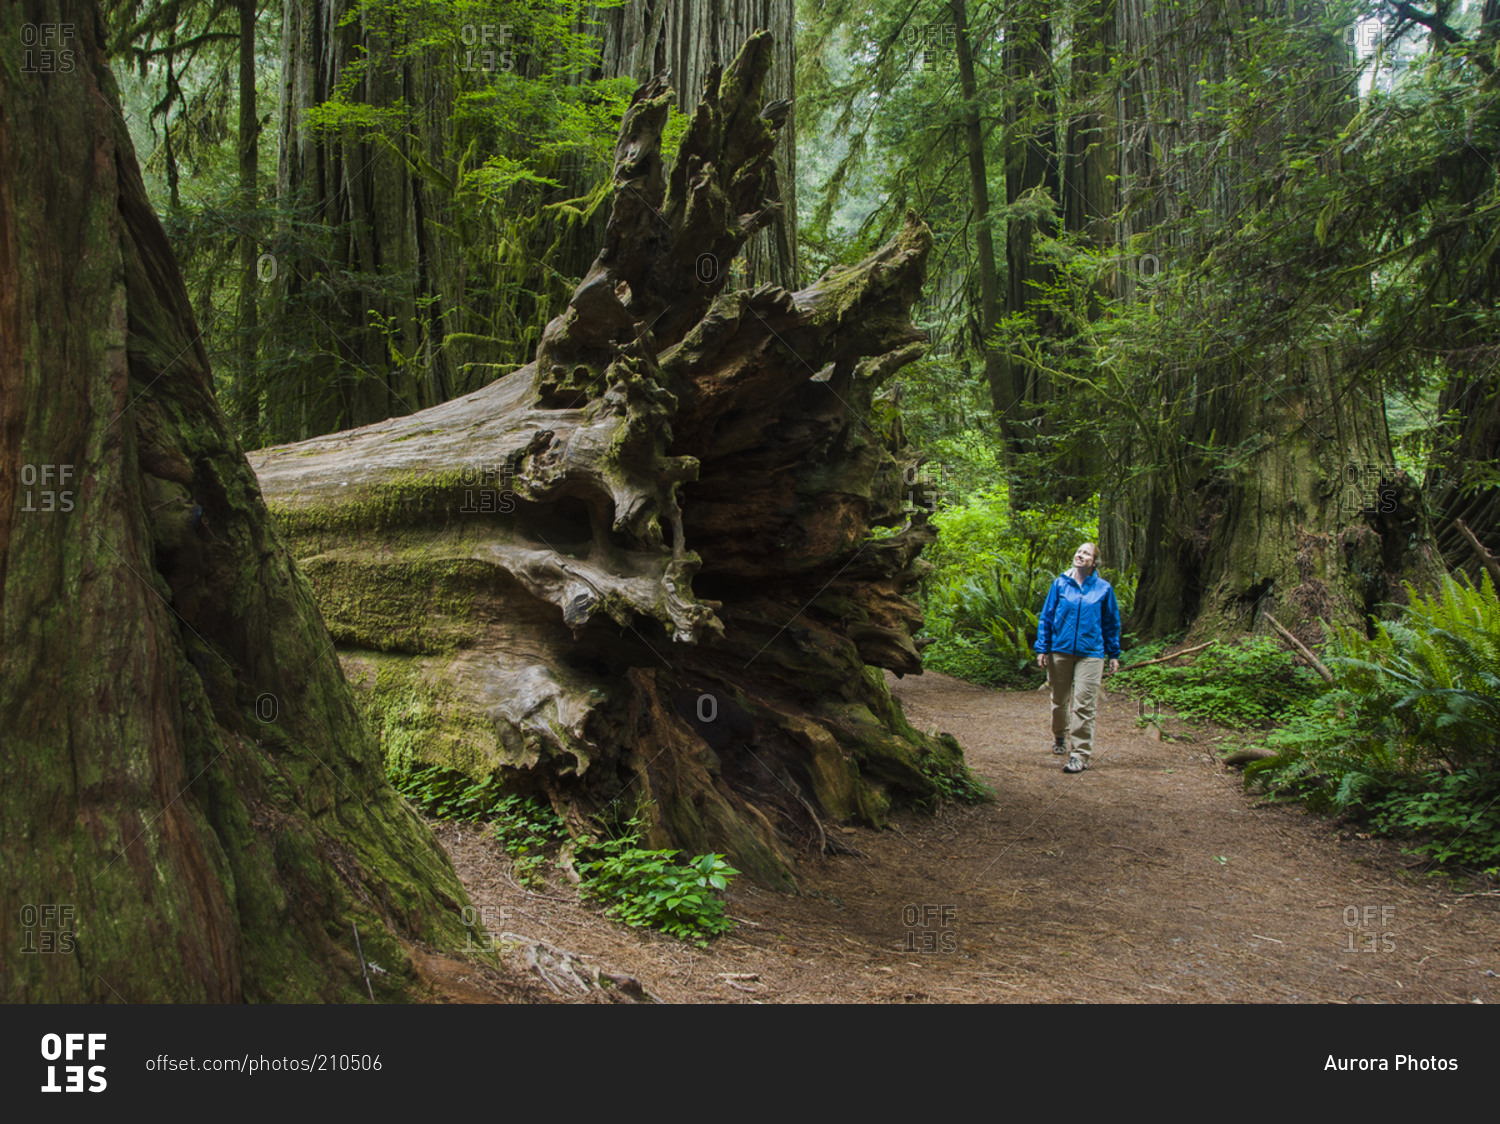 Woman by fallen Redwood Tree in Redwood National Park, California